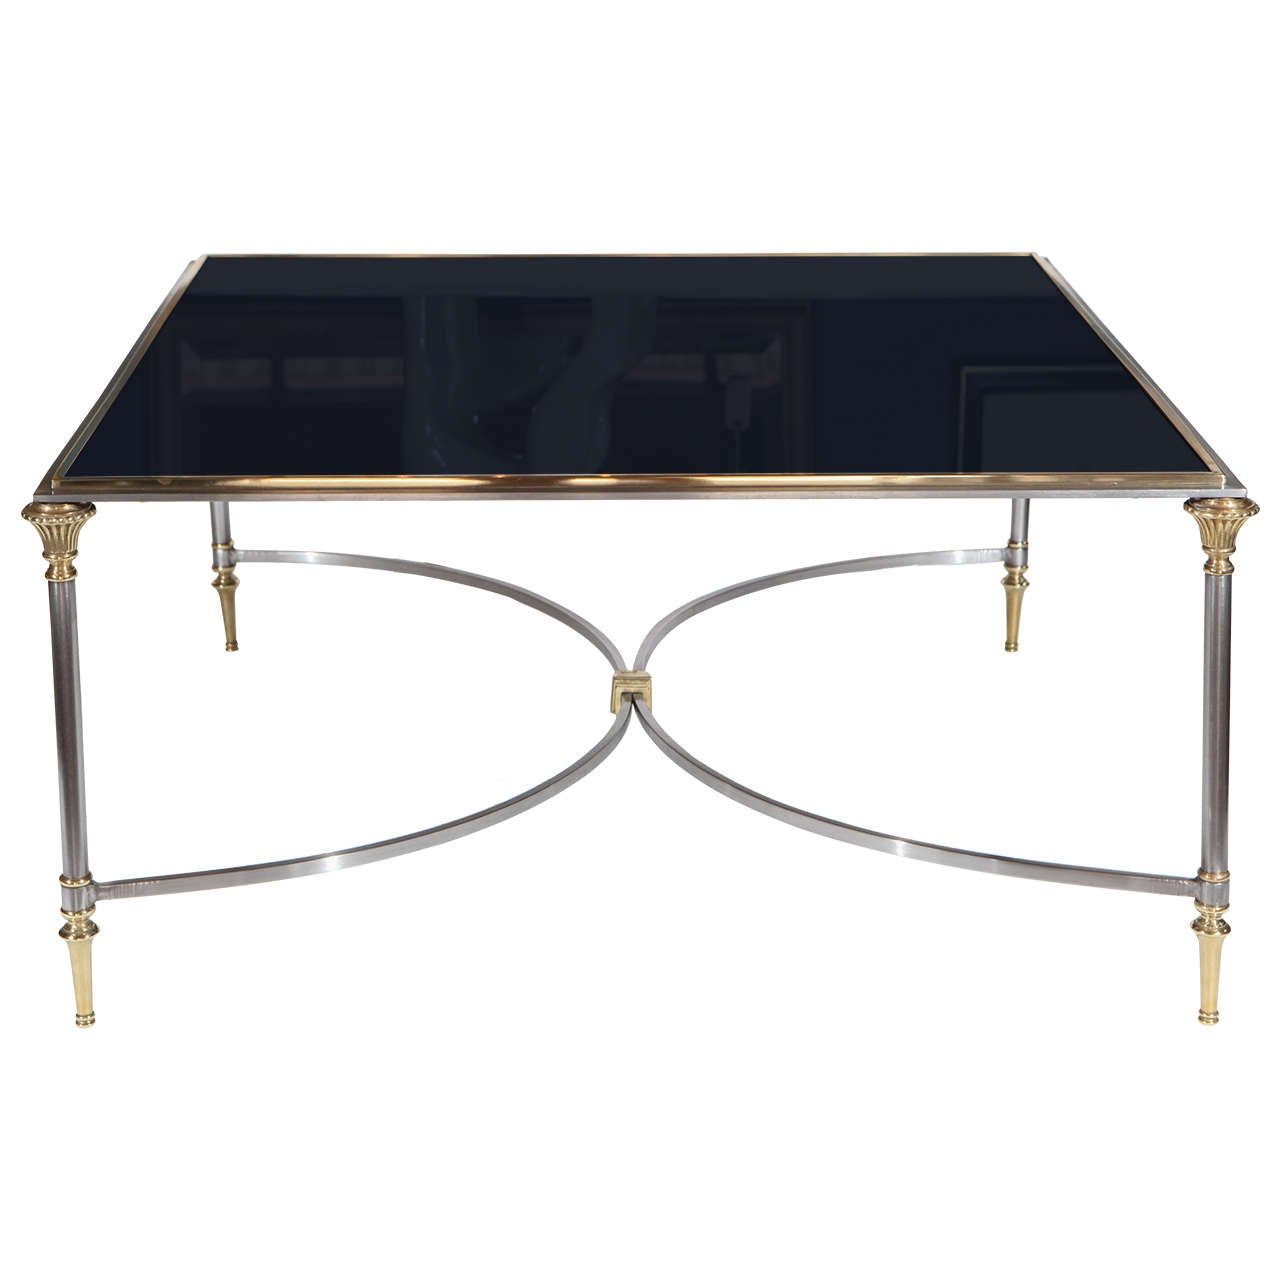 Hollywood Regency Coffee Table In The Manner Of Maison Jansen For Sale In Regency Cain Steel Coffee Tables (Gallery 9 of 21)